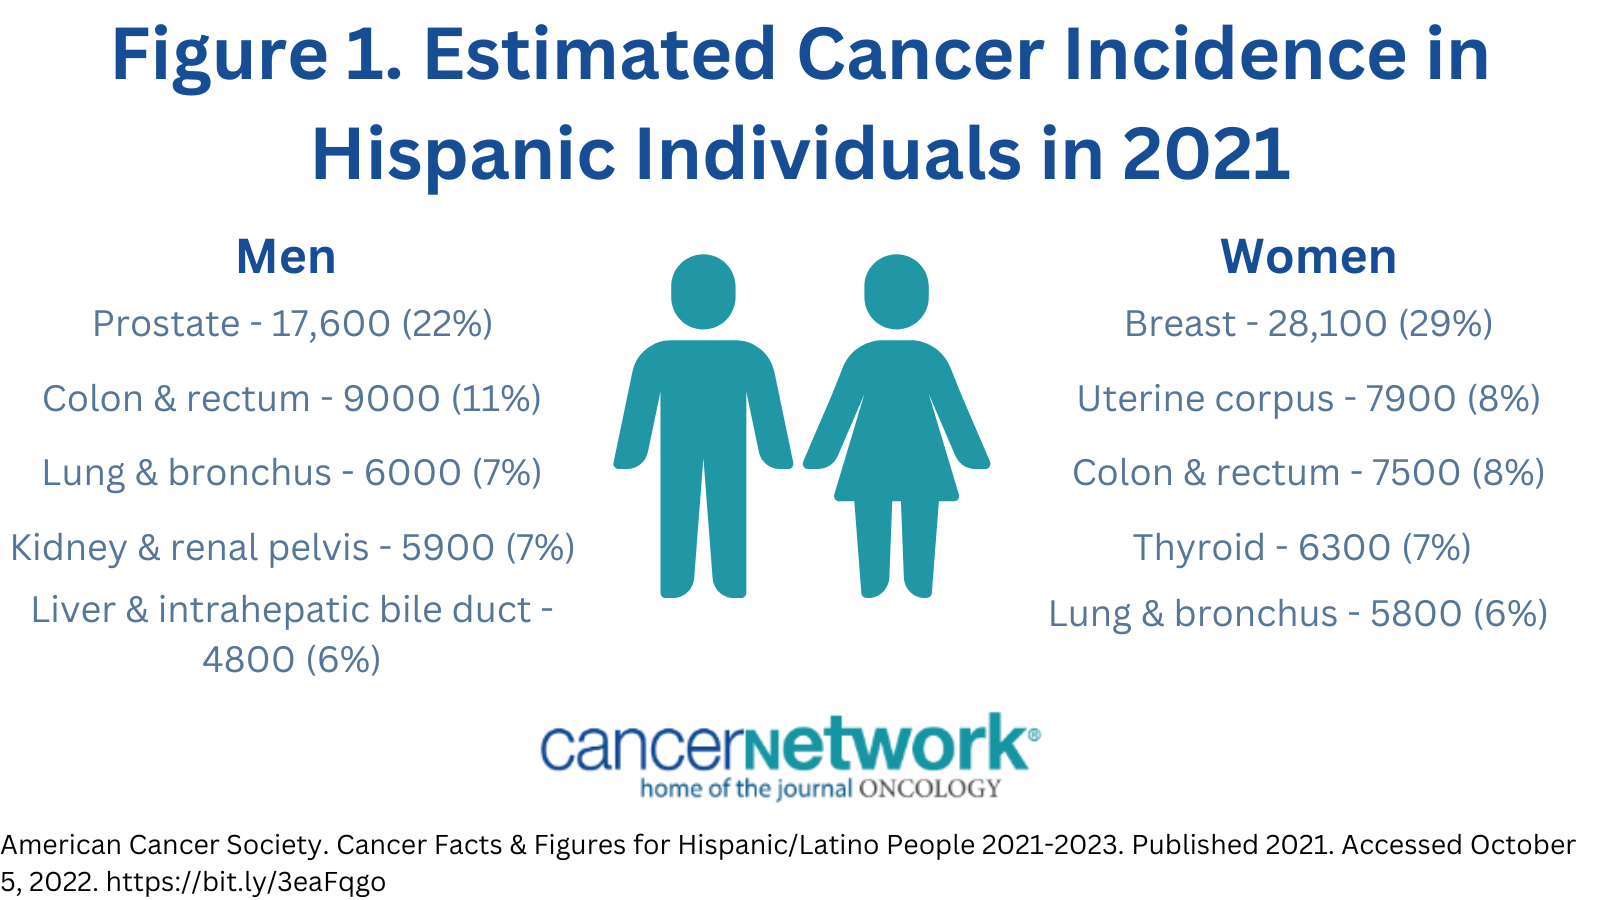 FIGURE1. Estimated Cancer Incidence in Hispanic Individuals in 2021